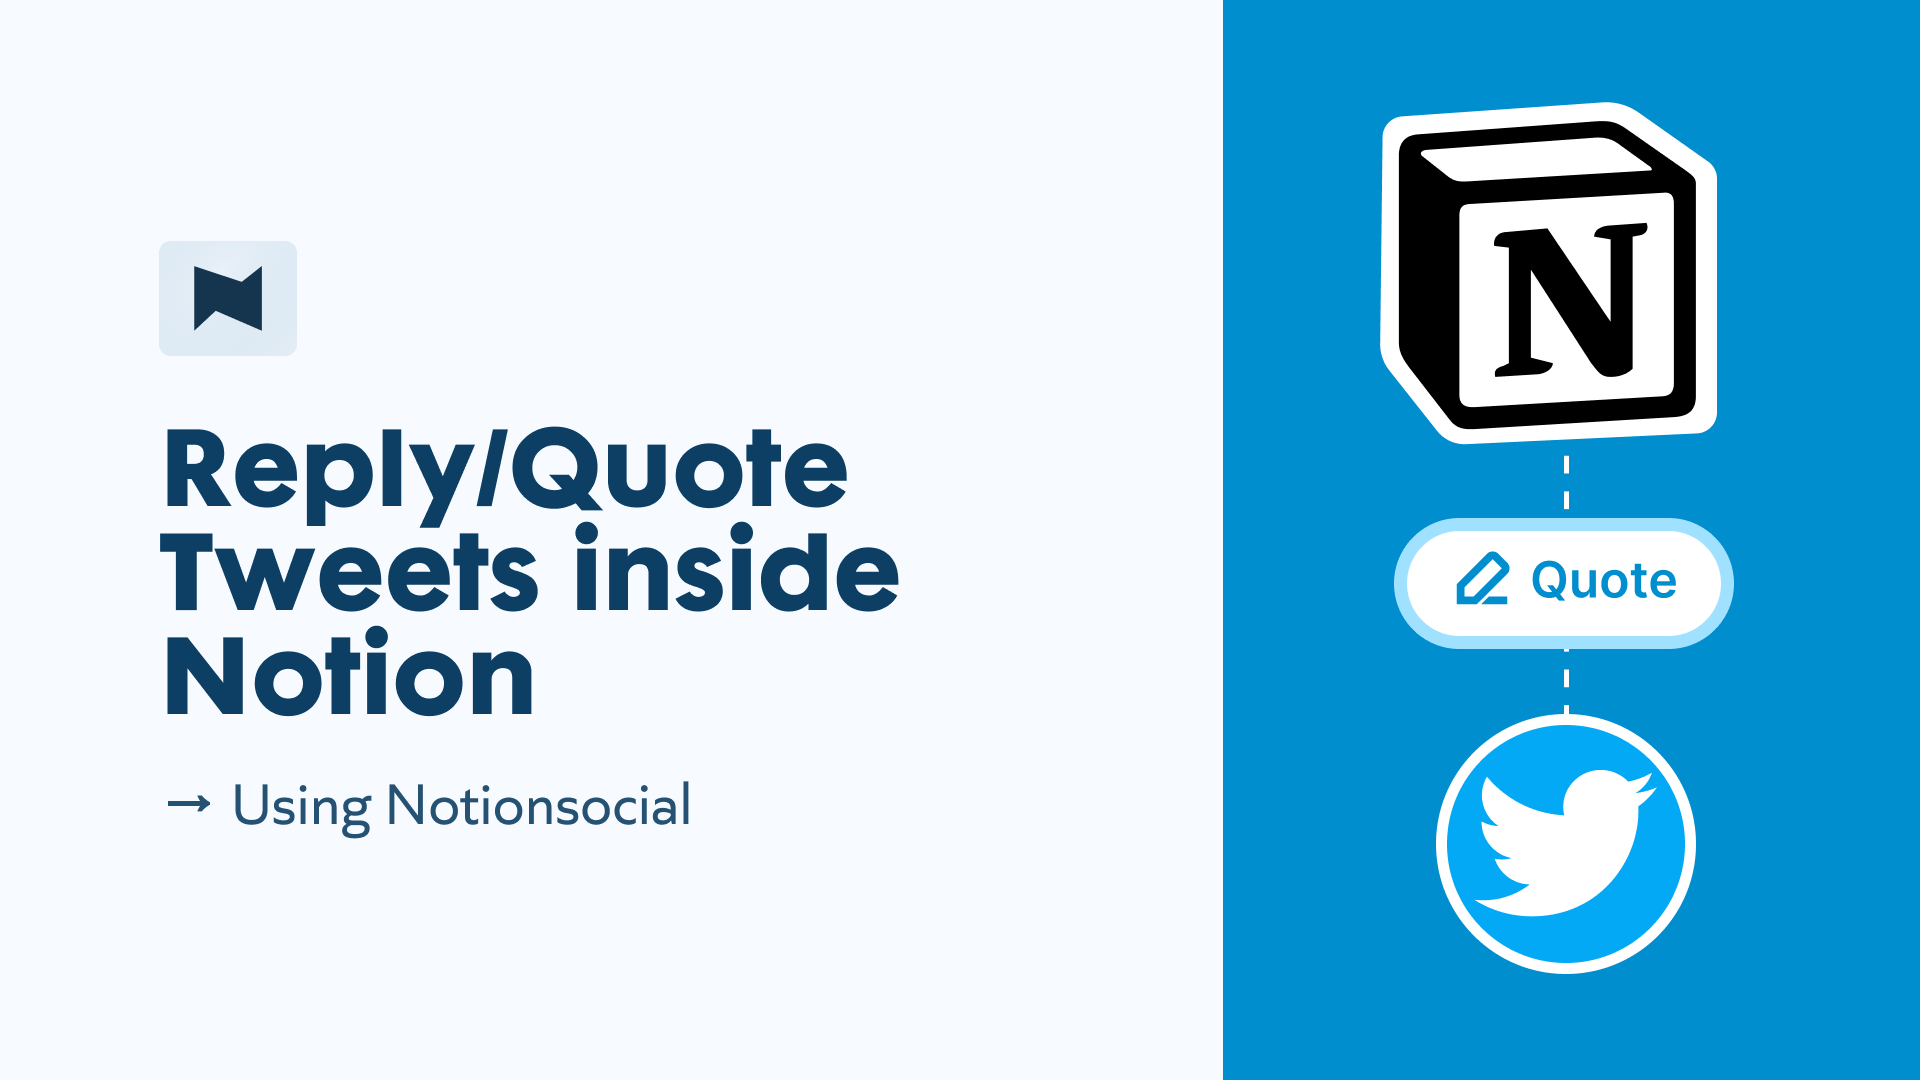 How to Reply/Quote Tweets inside Notion, Using Notionsocial